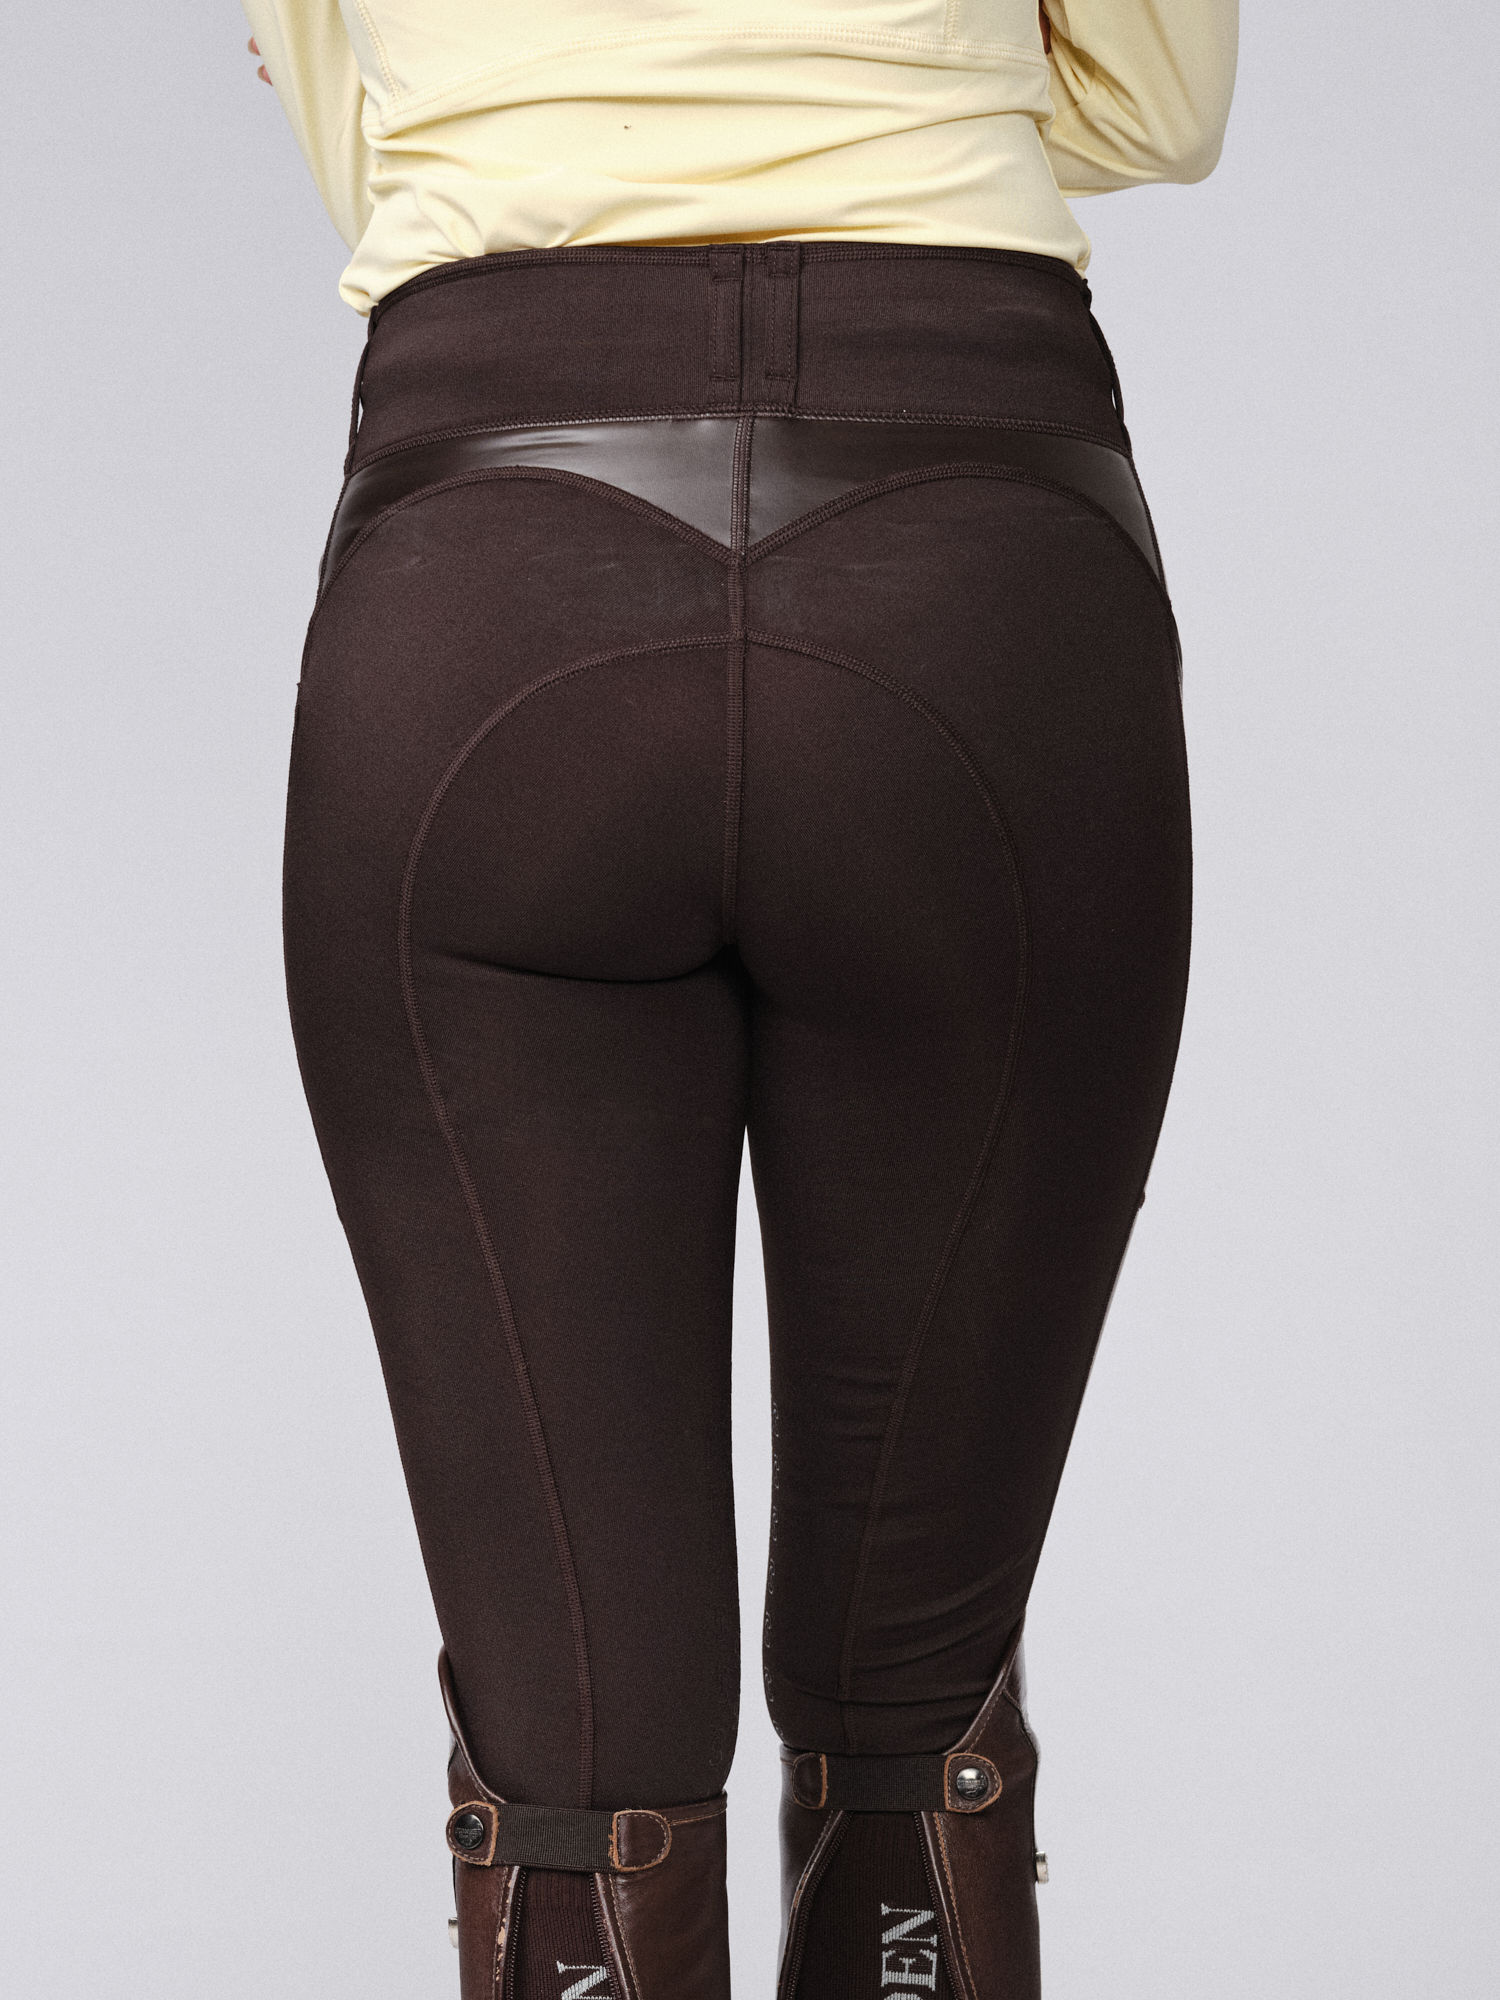 Tanya Riding Tights • PS of Sweden, Hybrid Grip